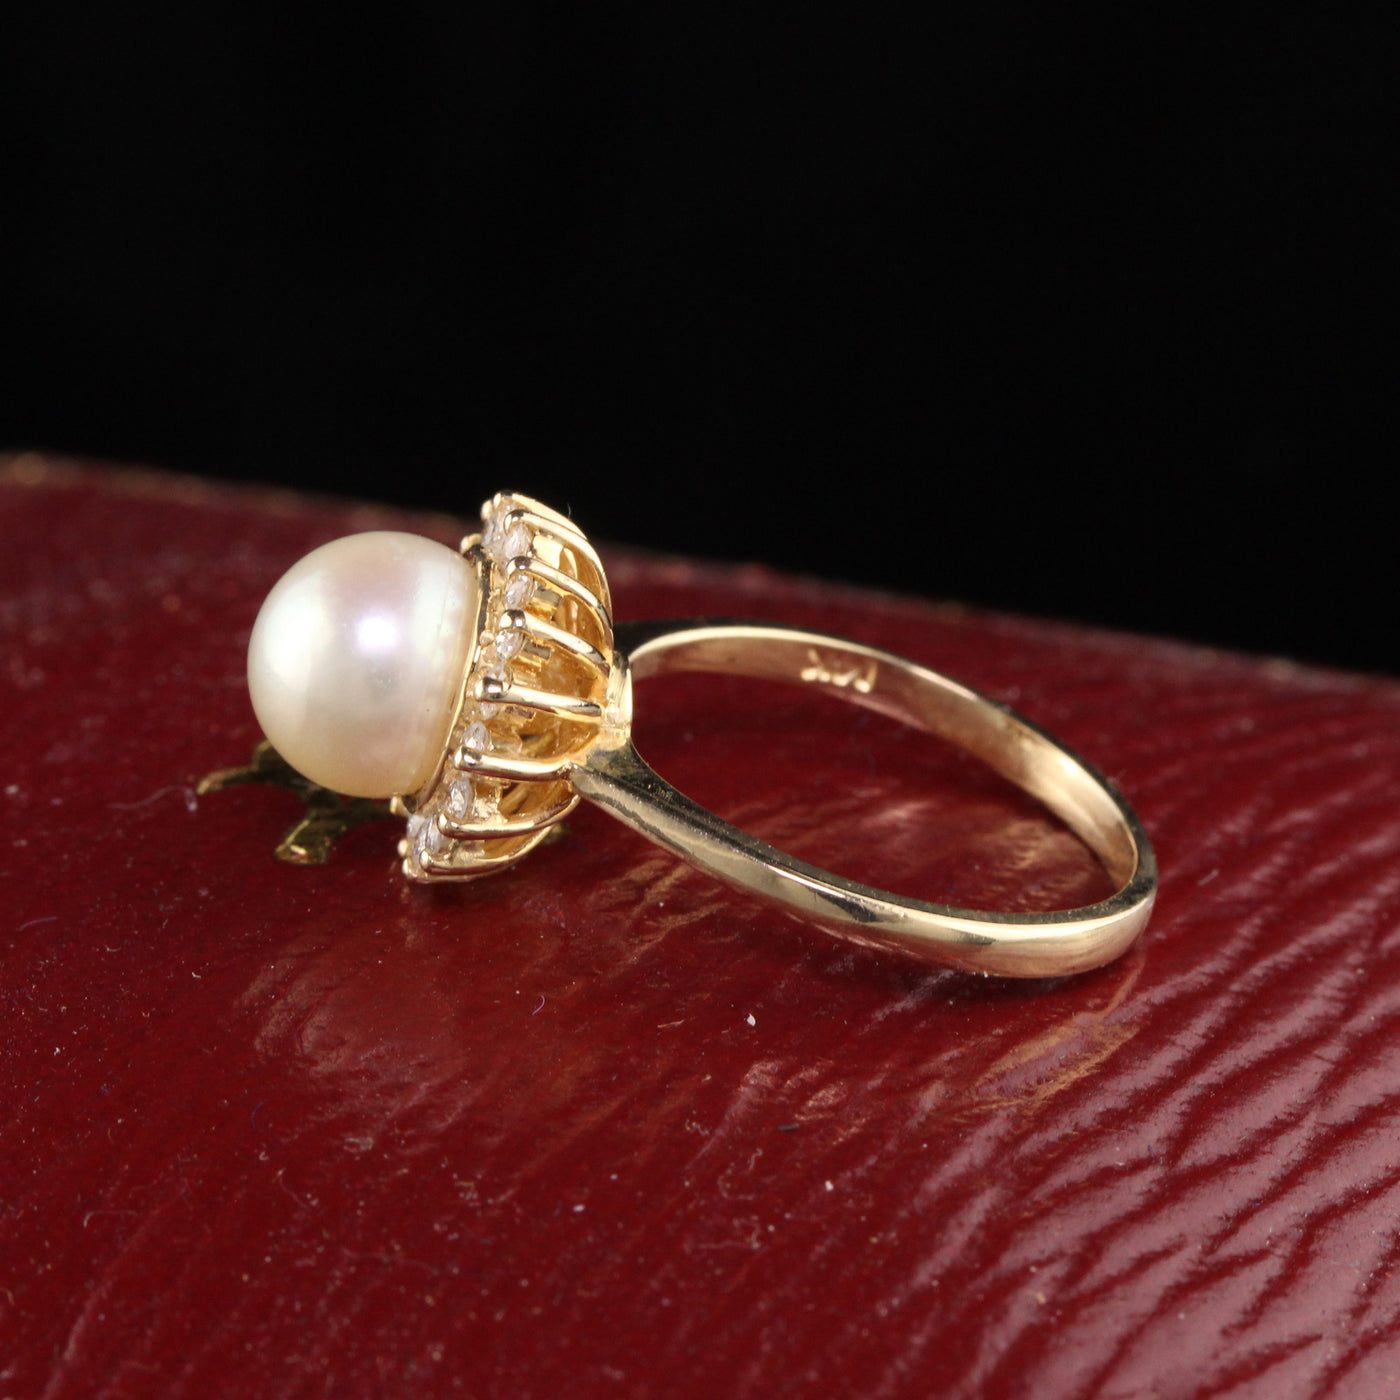 14K Yellow Gold Pearl and Diamond Halo Ring